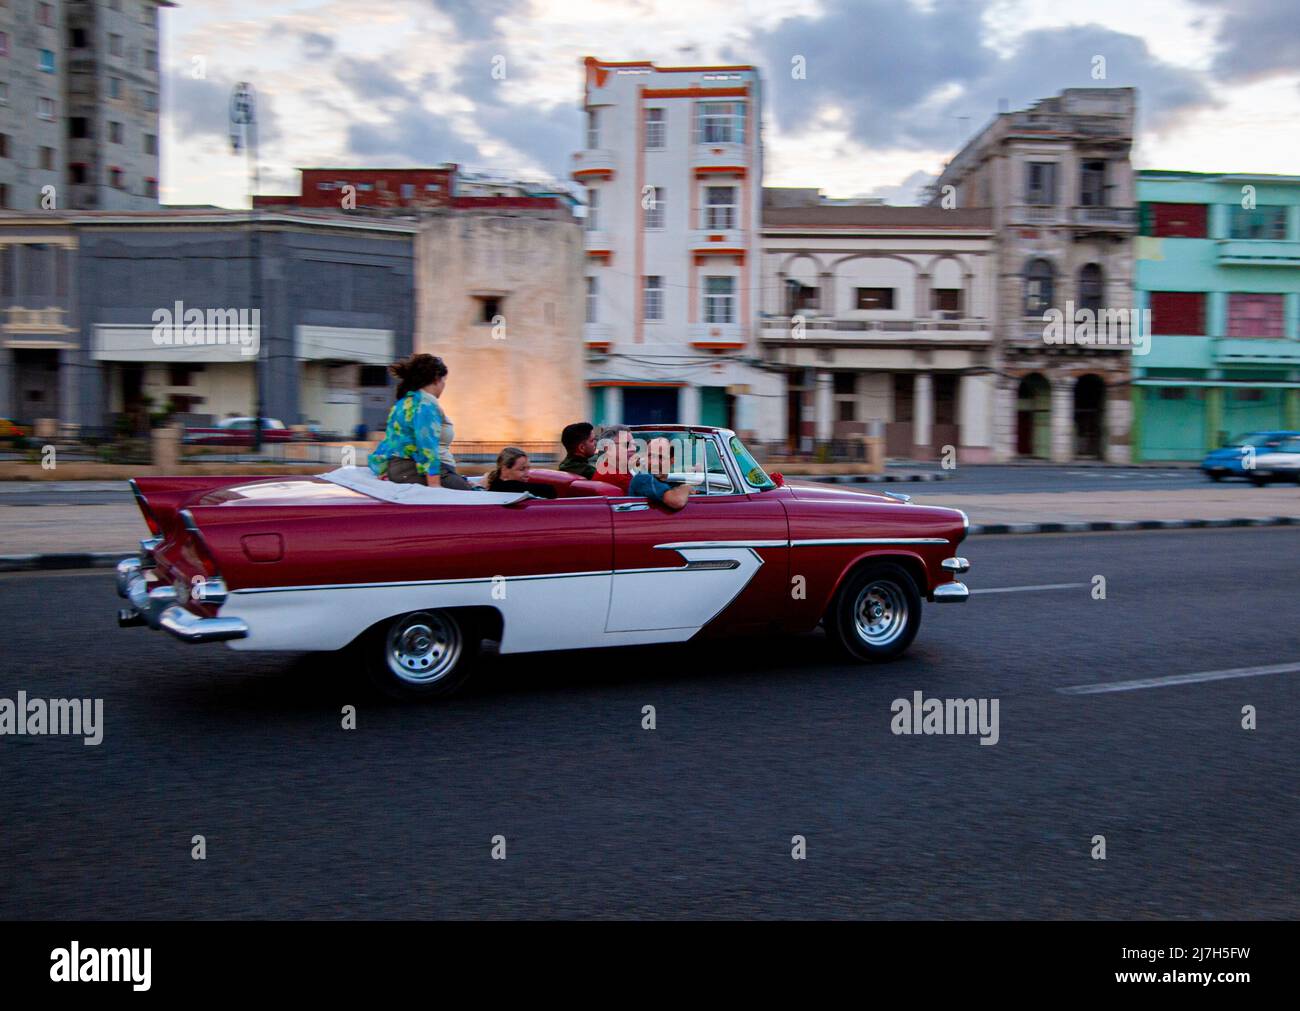 City tour through the streets of Havana, Cuba in an old American made classic car. Stock Photo